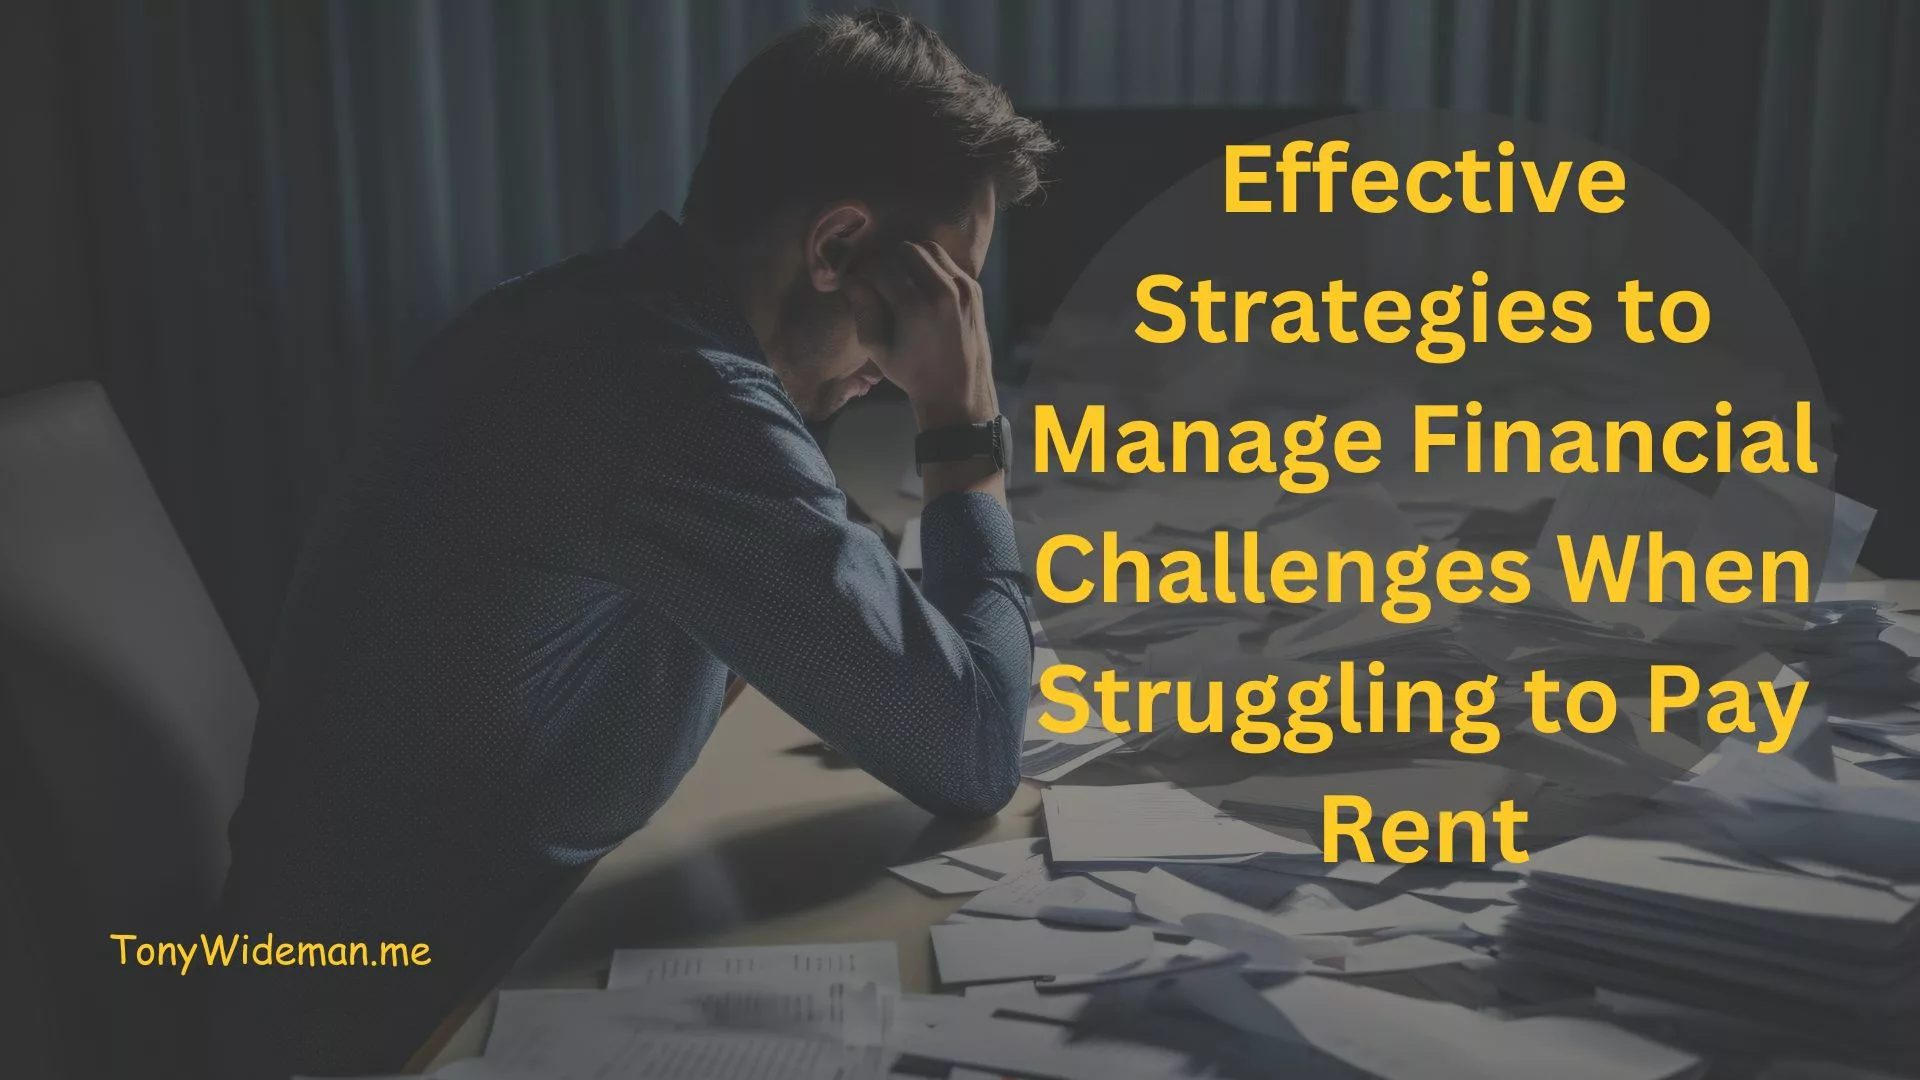 Effective Strategies to Manage Financial Challenges When Struggling to Pay Rent